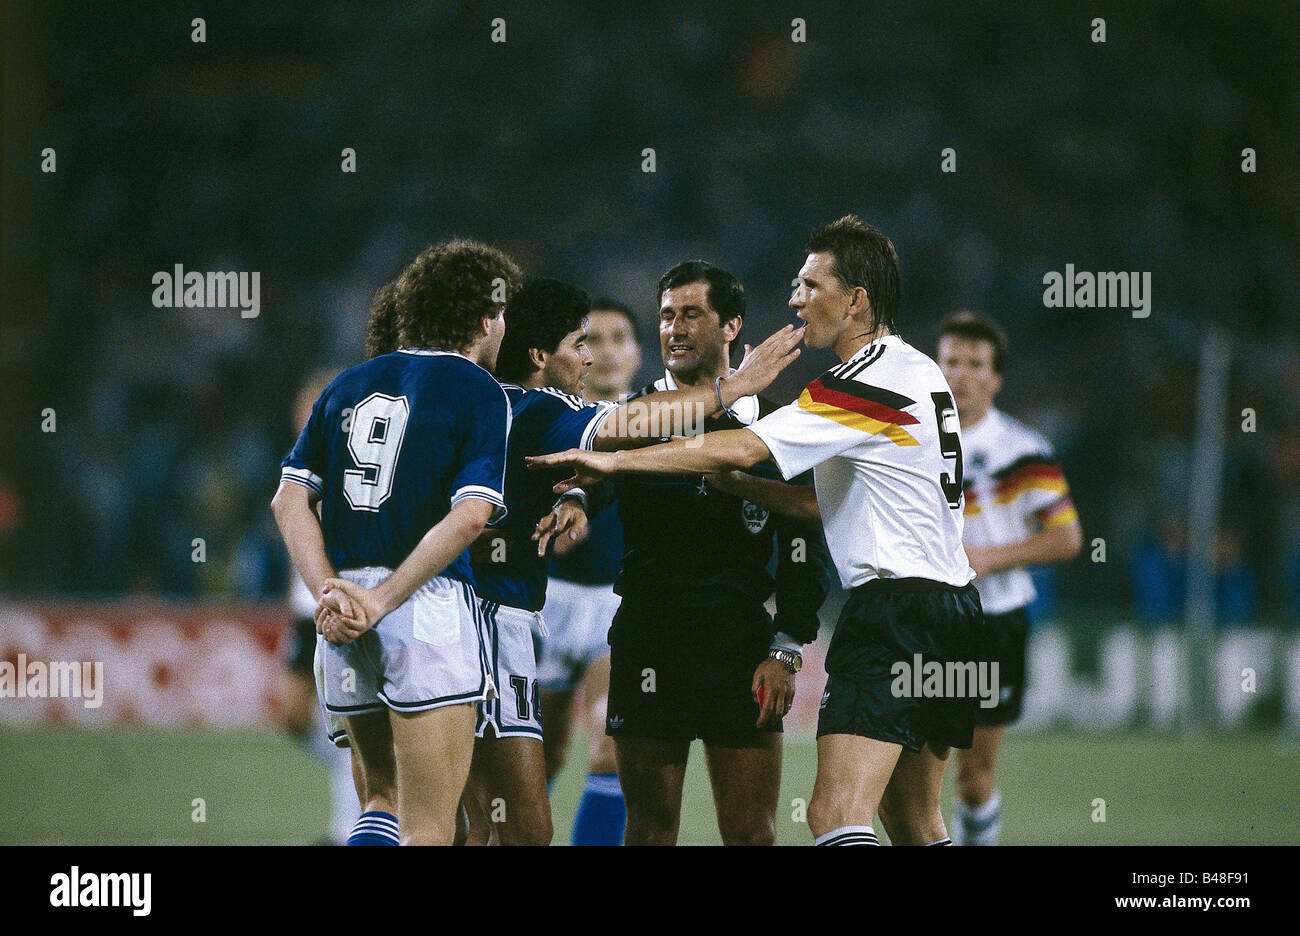 Sport / Sports, soccer, football, World Cup 1990, final round, final, Germany against Argentina, (1:0) in Rome, Italy, 8.7.1990, scene with from left to right, Gustavo Dezotti, Diego Maradona, referee Edgardo Mendez Codesal, Klaus Augenthaler, discussion, match, historic, historical, 20th century, people, 1990s, Stock Photo